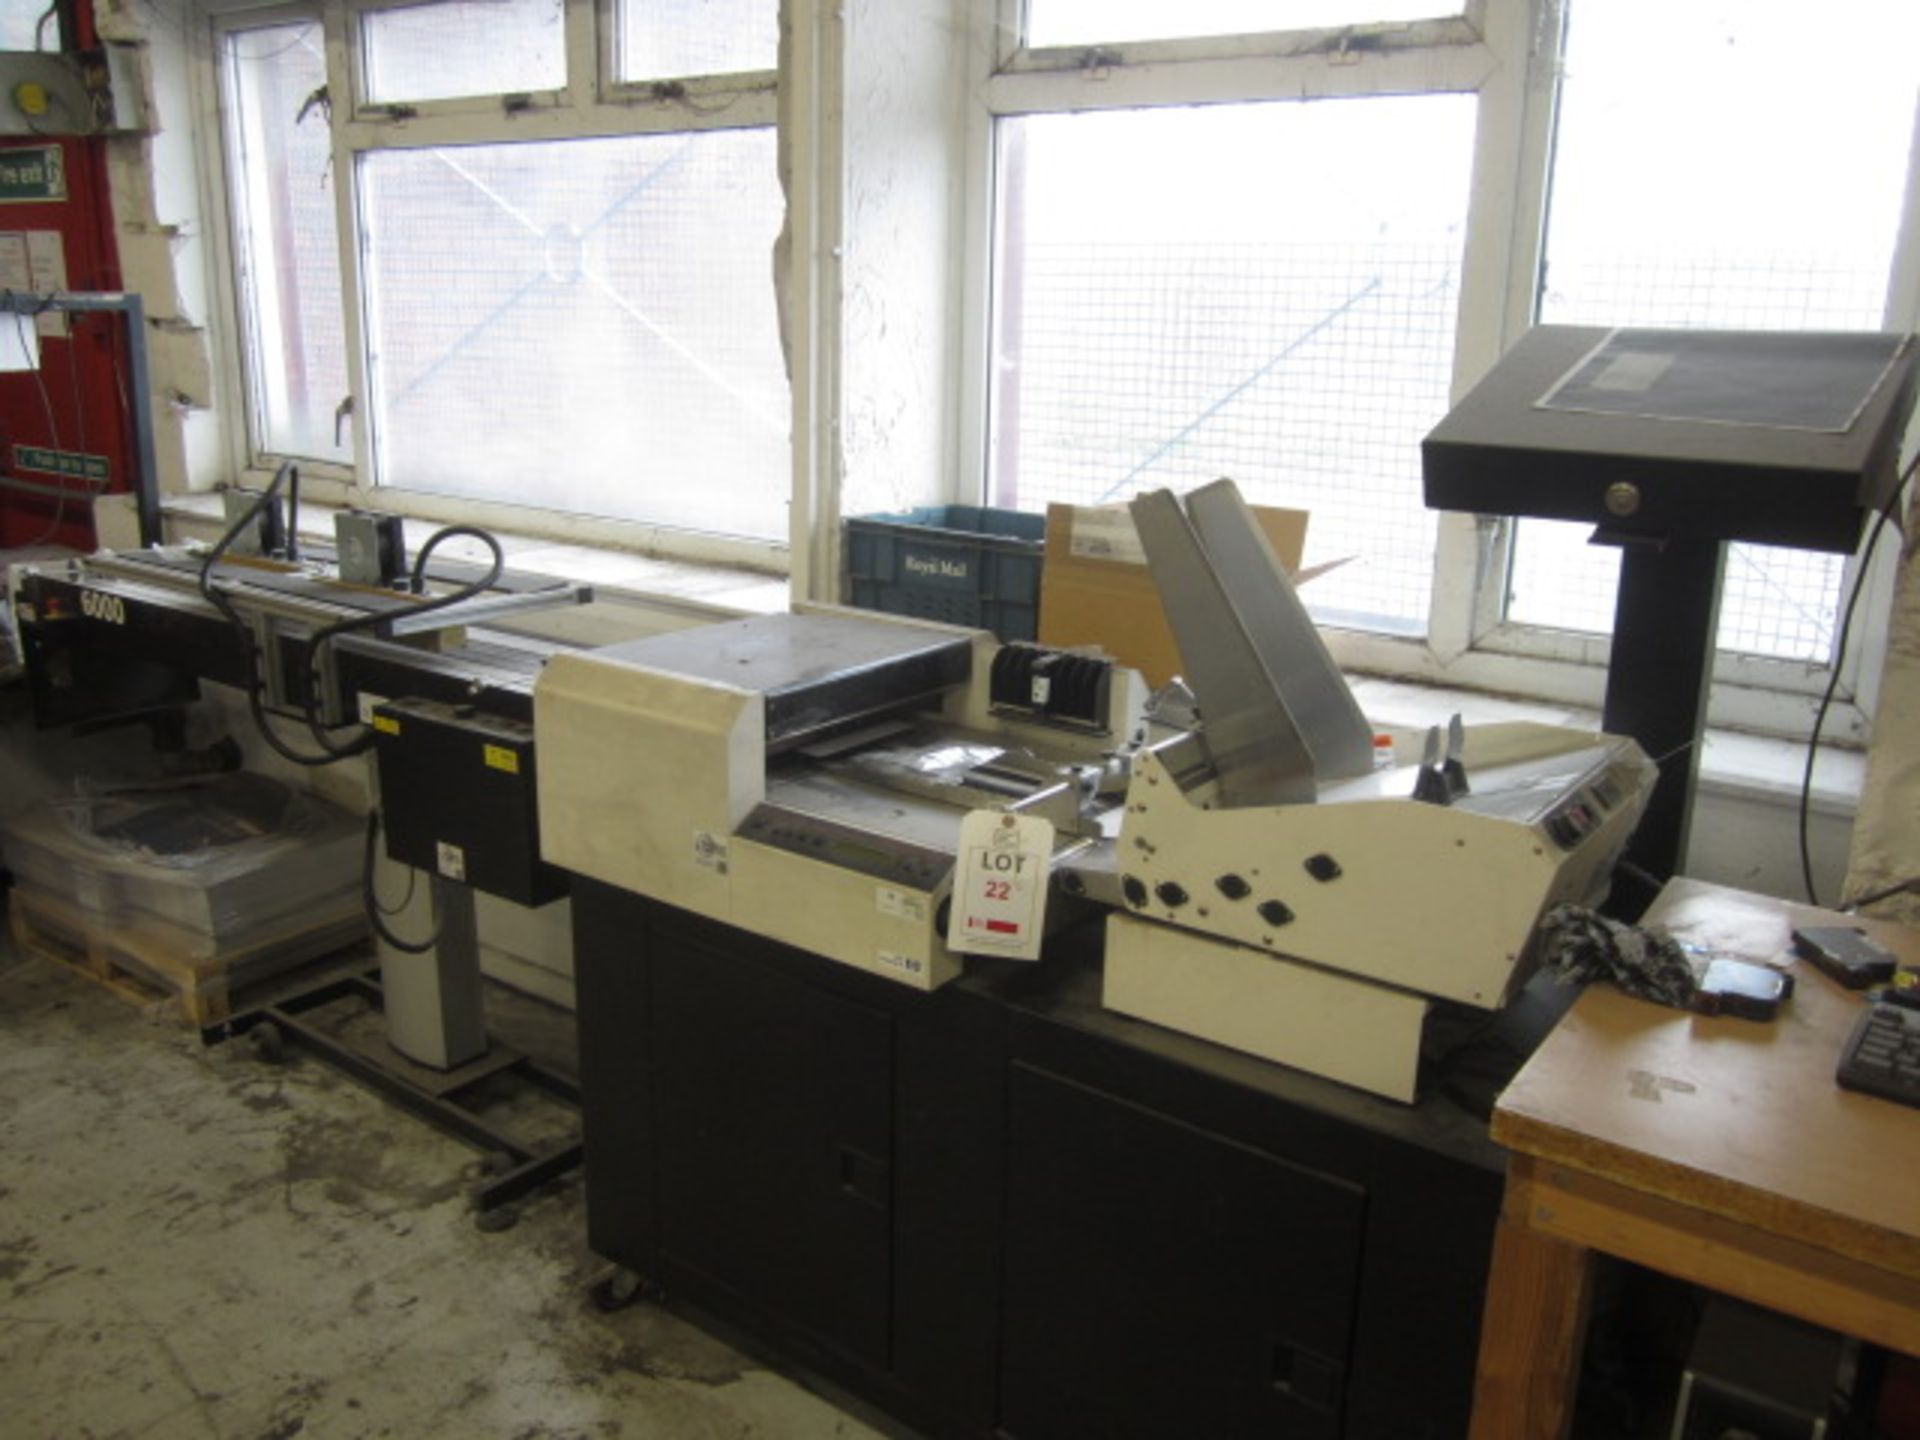 Astrojet 3800 envelope printer, serial no. DR26-064 (2012), with AMS MHDC 6000-2000, serial no. - Image 2 of 4